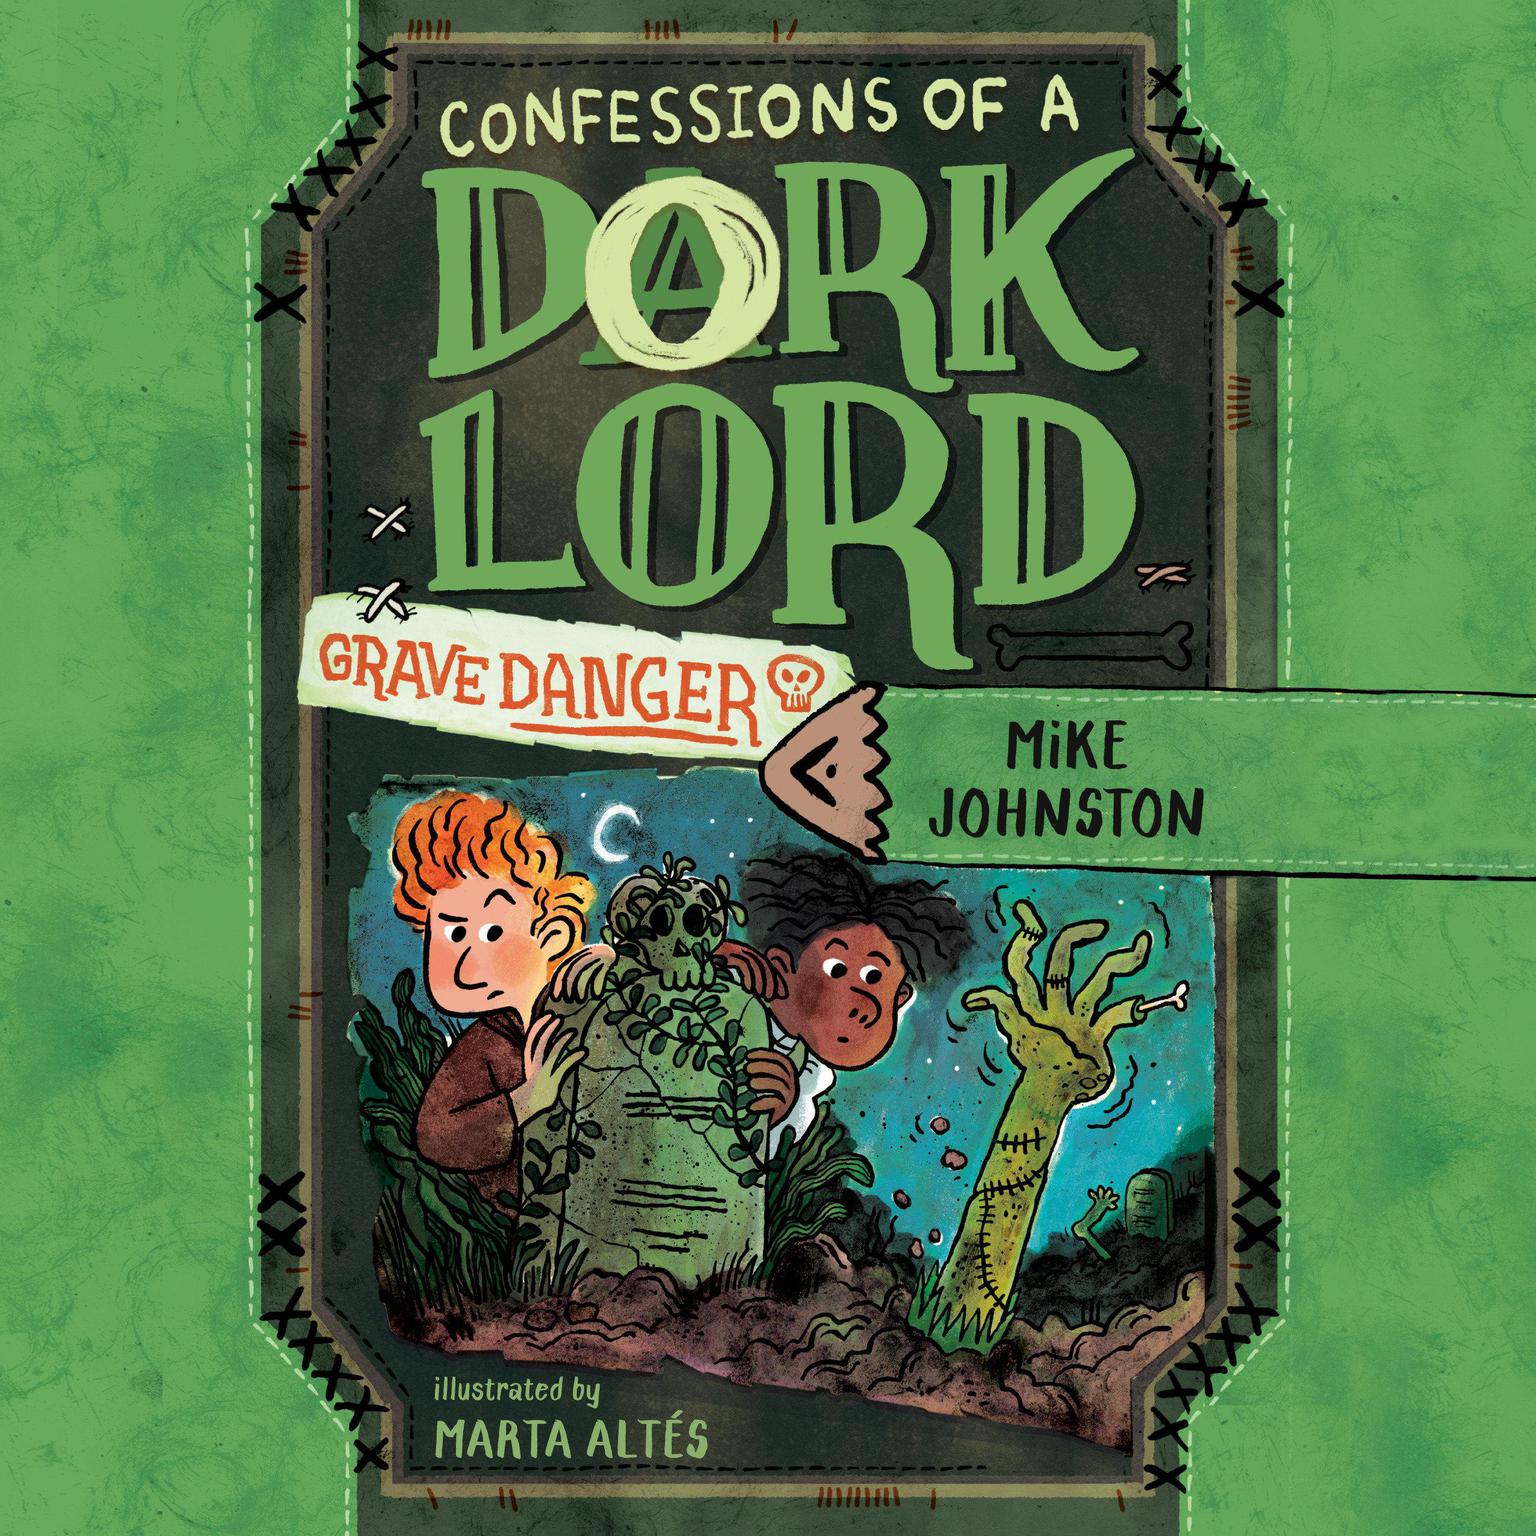 Grave Danger (Confessions of a Dork Lord, Book 2) Audiobook, by Mike Johnston